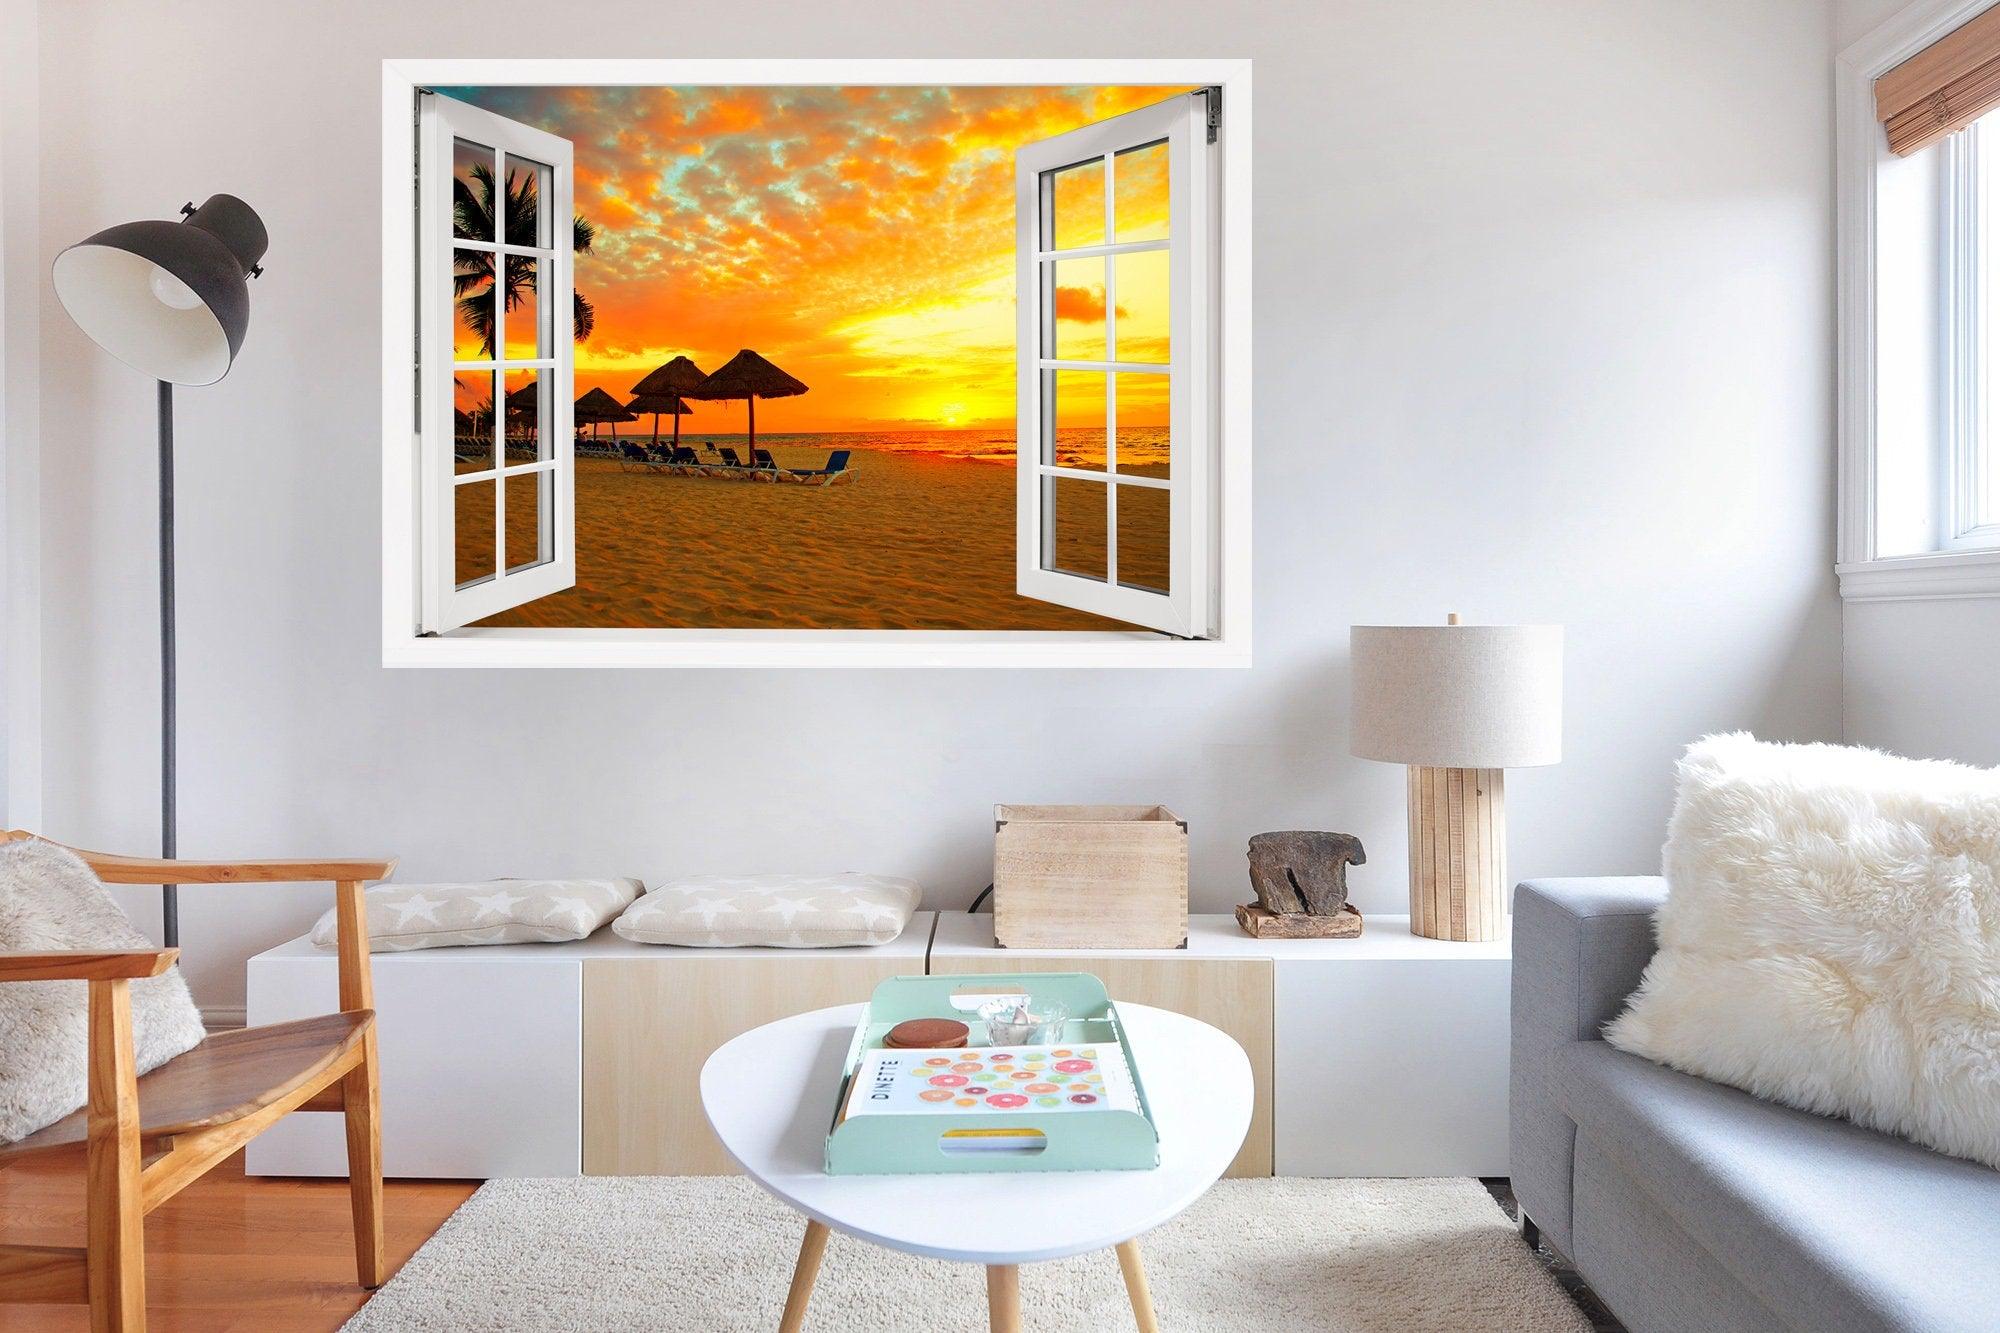 Window Scape Beach Sunset #11 Window Decal Sticker Sunset Lake Removable Fabric Window Frame Office Bedroom 3D